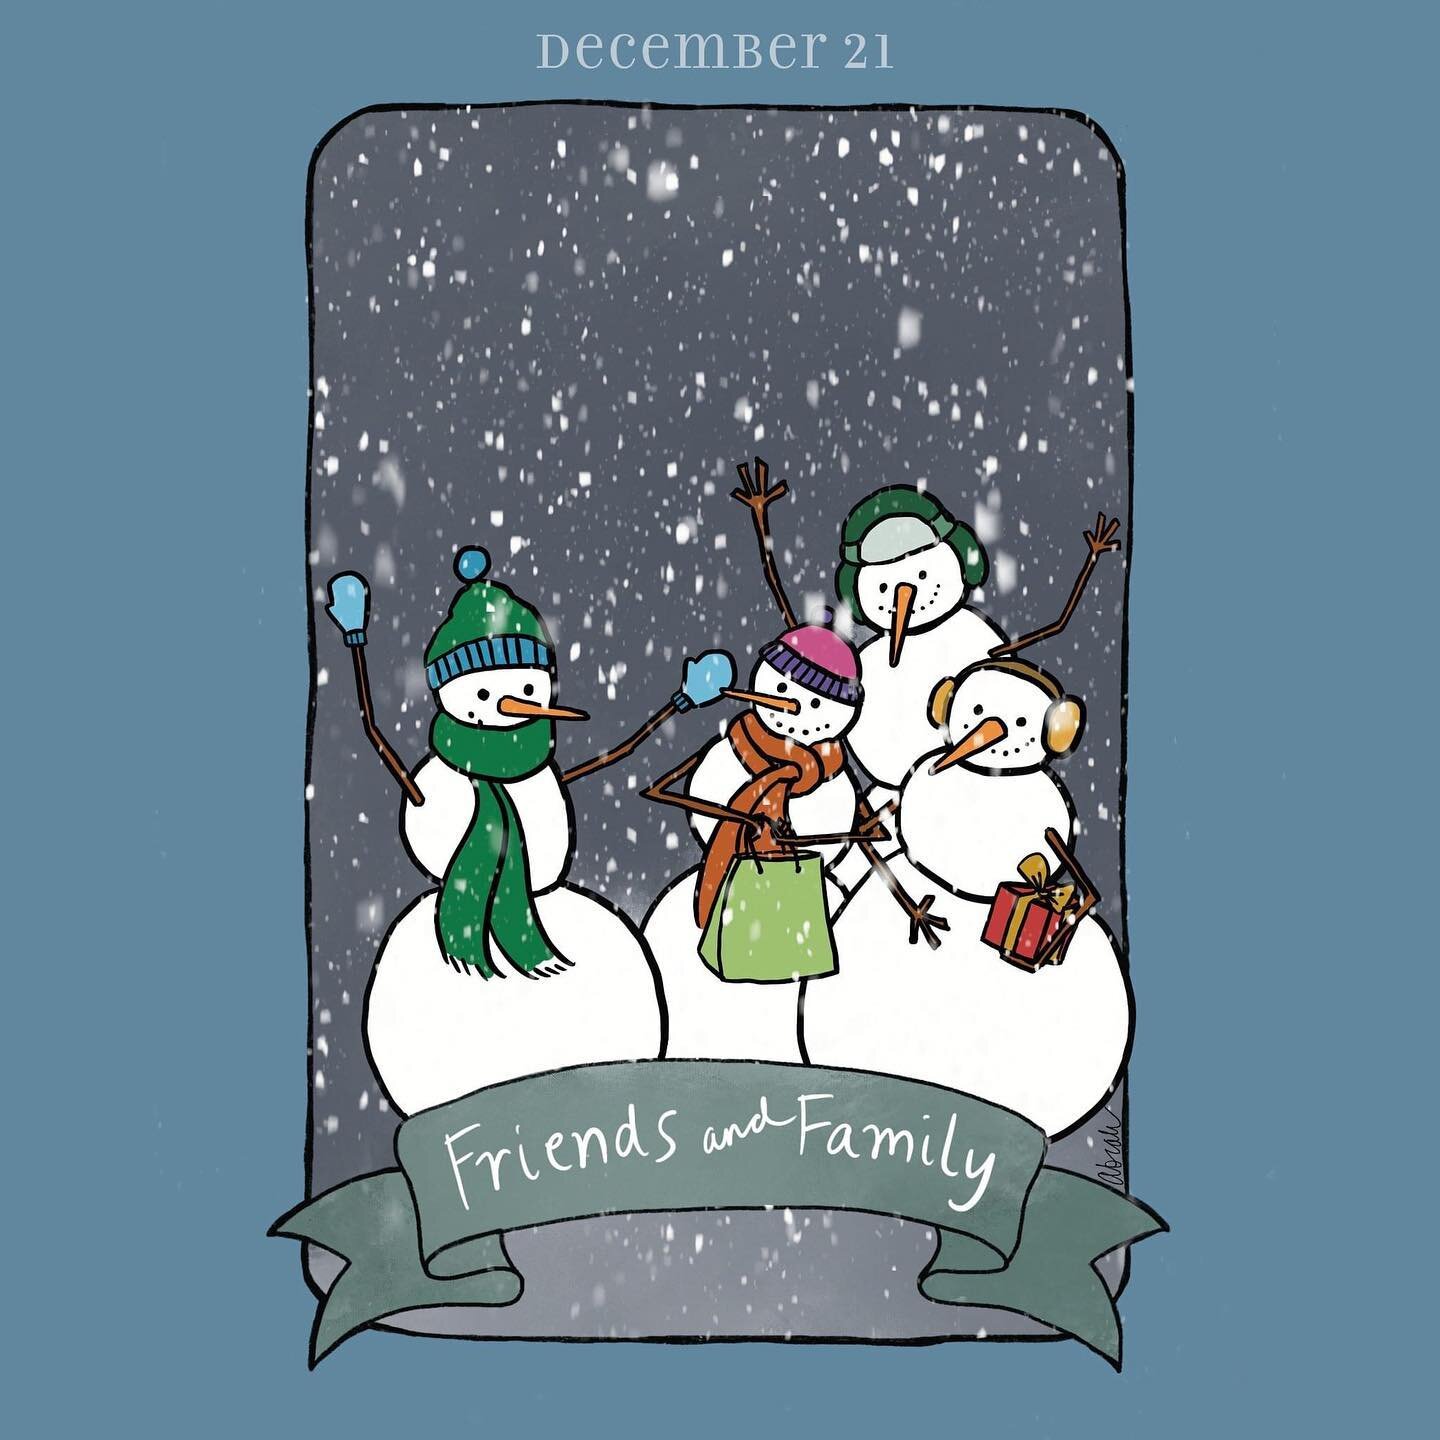 Friends and family should be appreciated every day, not just the holidays &mdash; but give extra hugs and smiles this time of year, many people need them now more than ever. #holidaycountdown #friends #family #friendsthatarefamily #snowpeople #snow #